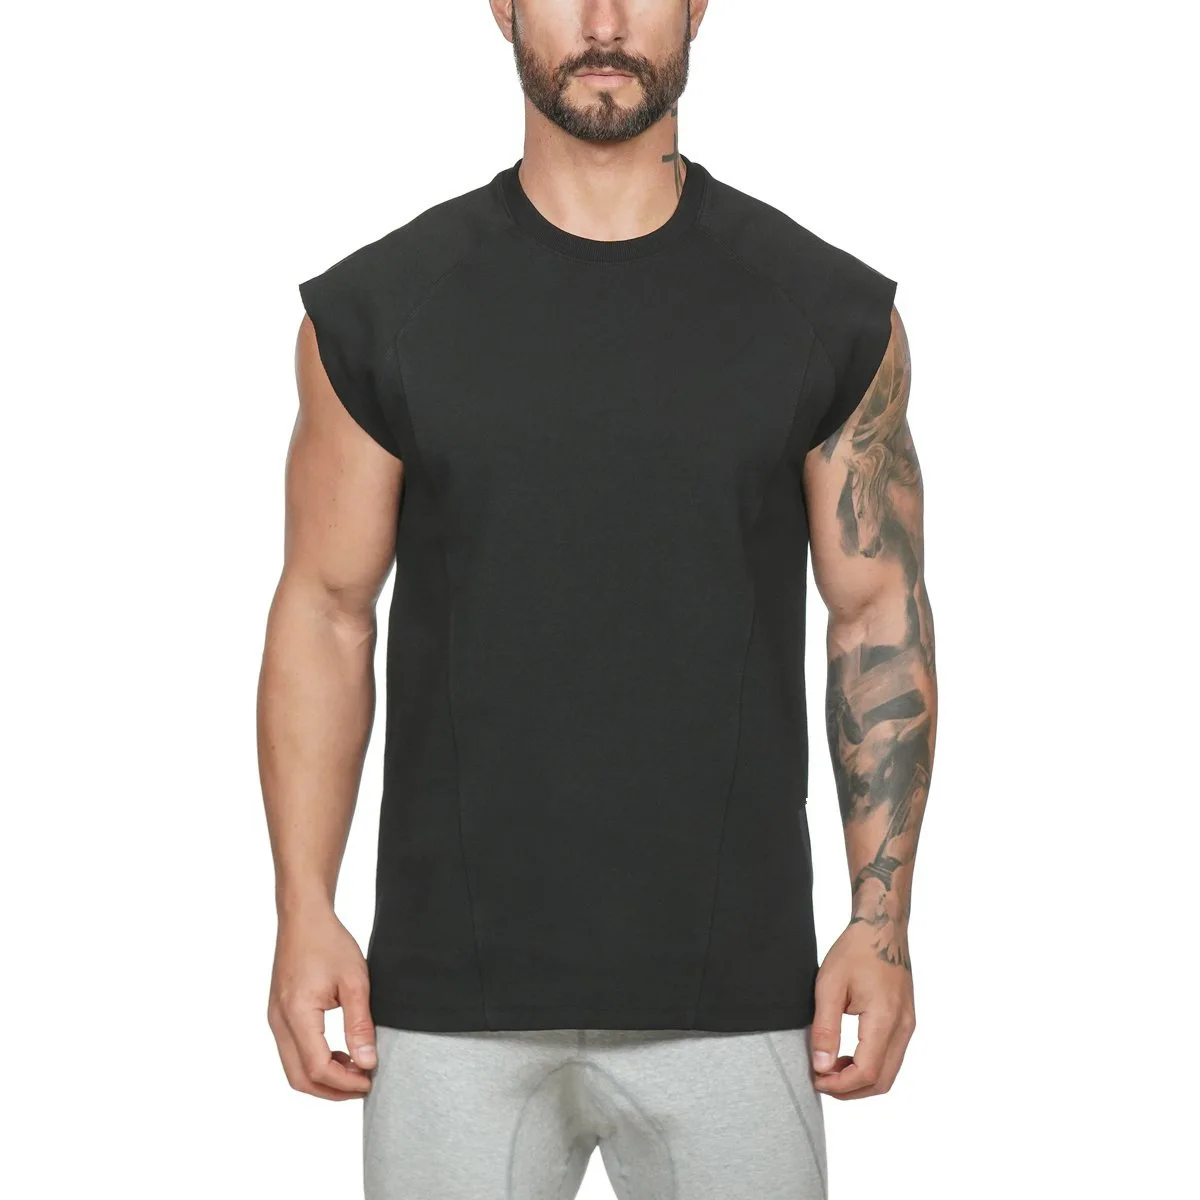 

New t-shirt men's short sleeve large sports sleeveless quick drying tight bottoming shirt fitness clothes